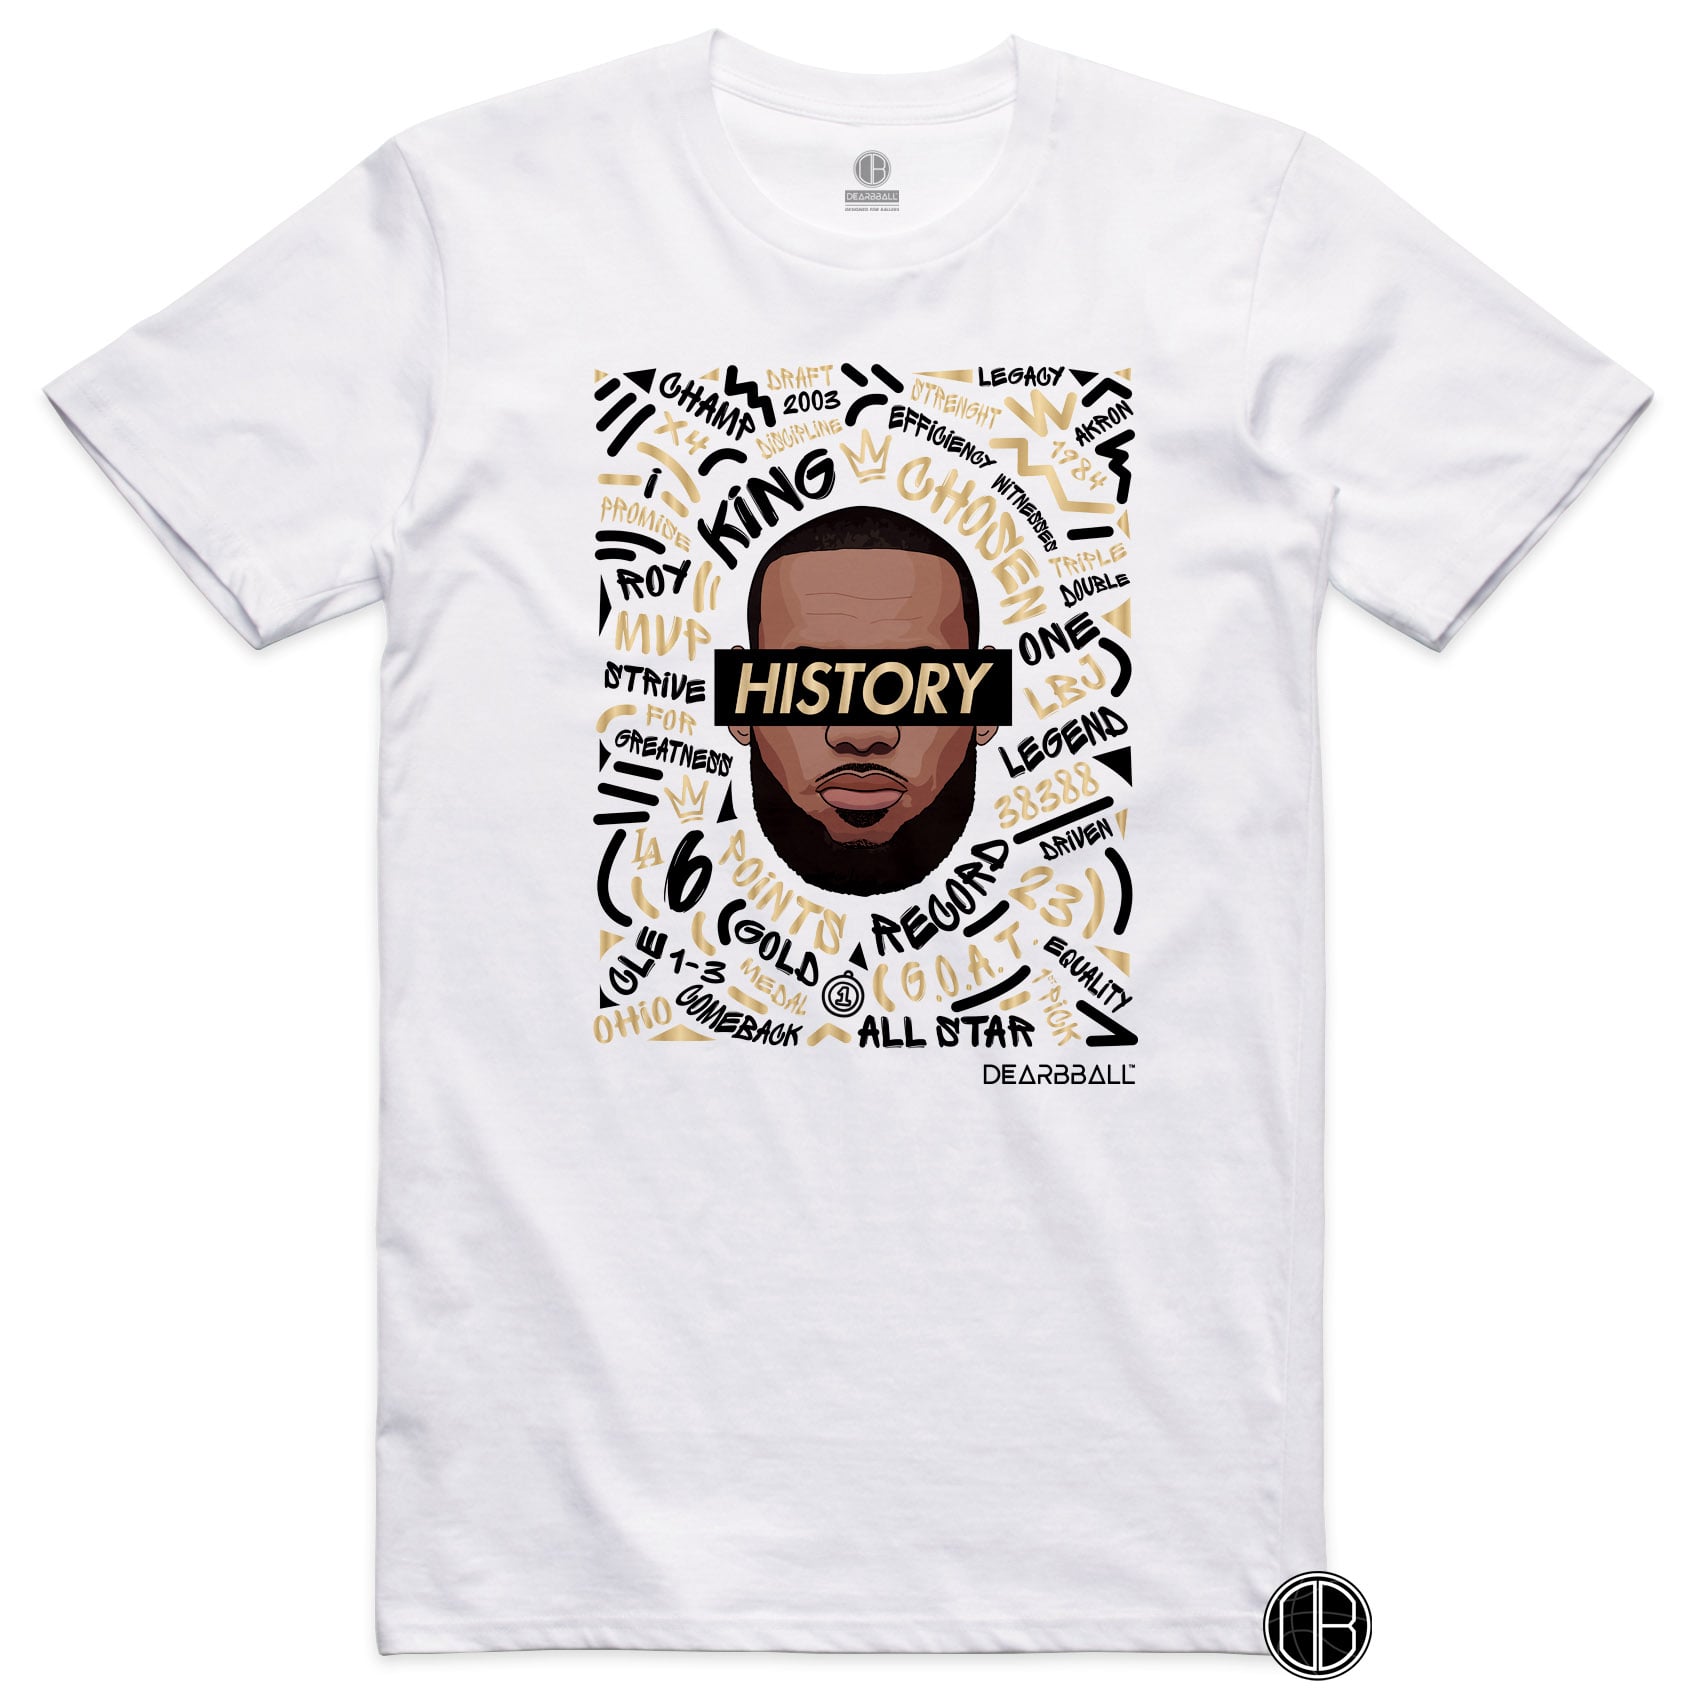 T-Shirt-Lebron-James-Los-Angeles-Lakers-Dearbball-clothes-brand-france